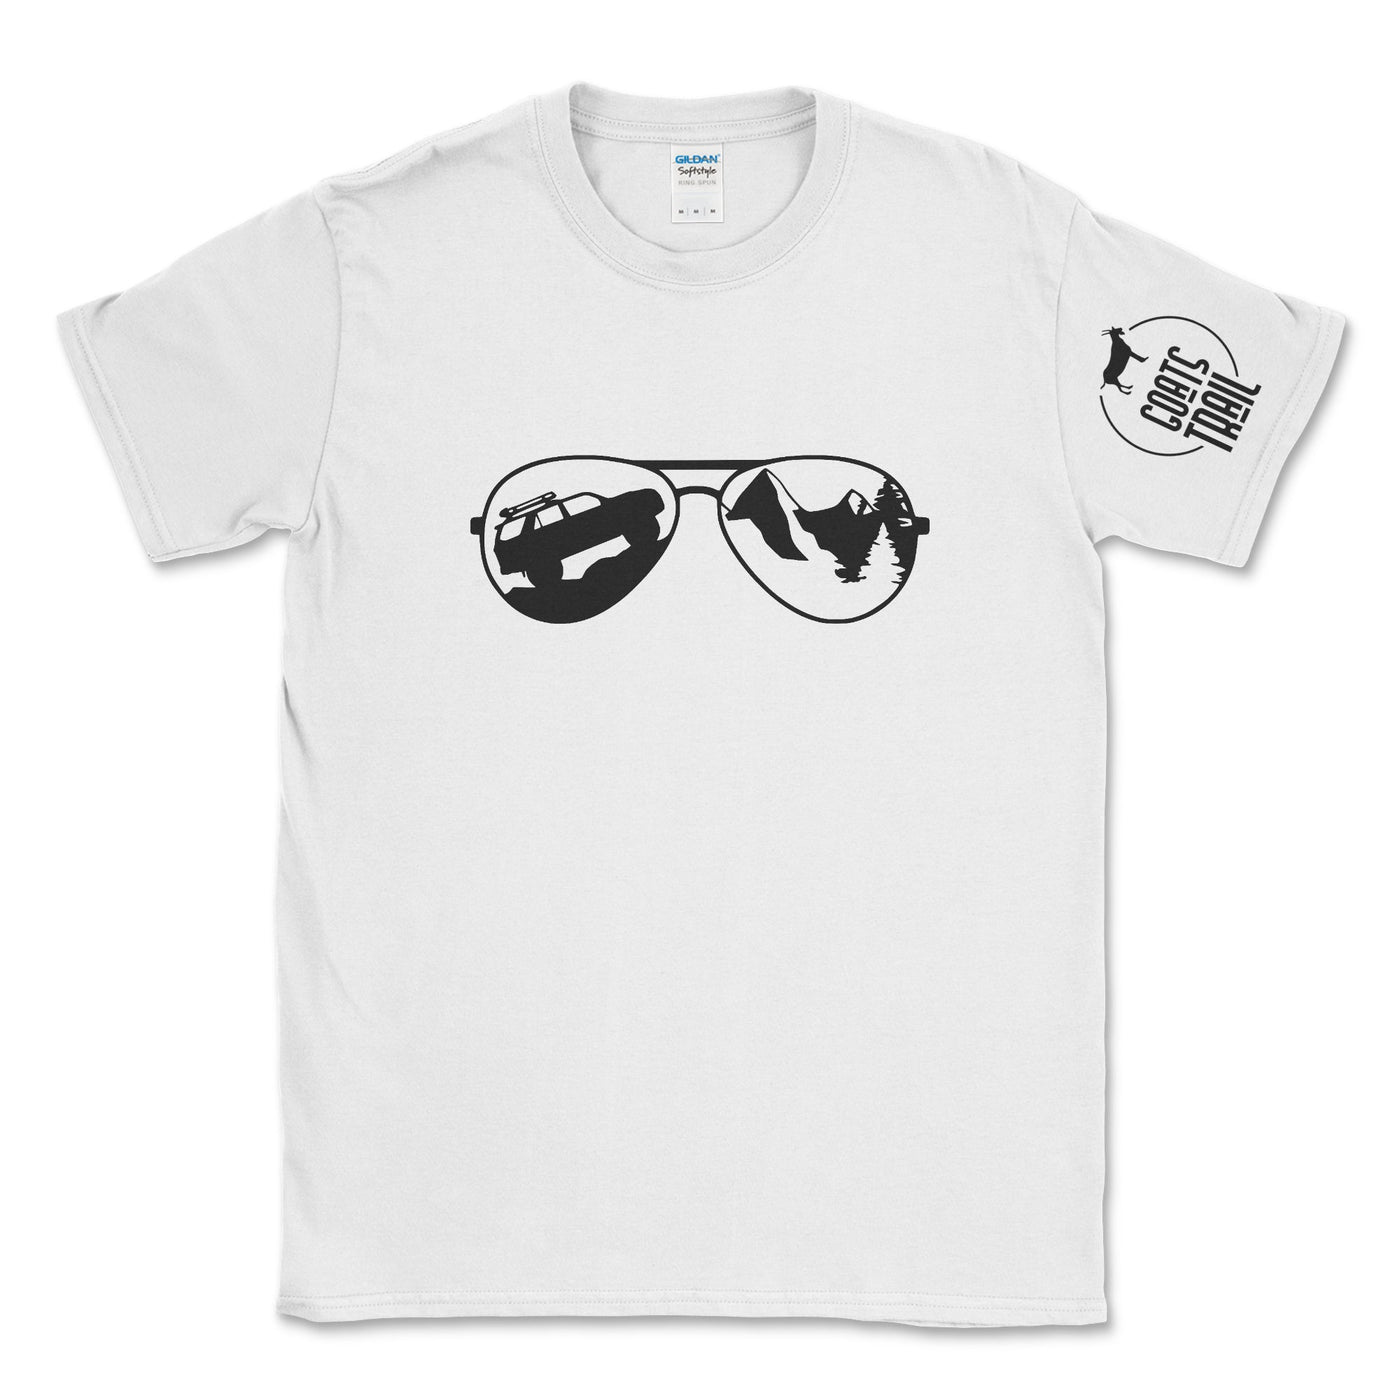 4Runner Sunglasses Graphic Tee - Goats Trail Off-Road Apparel Company